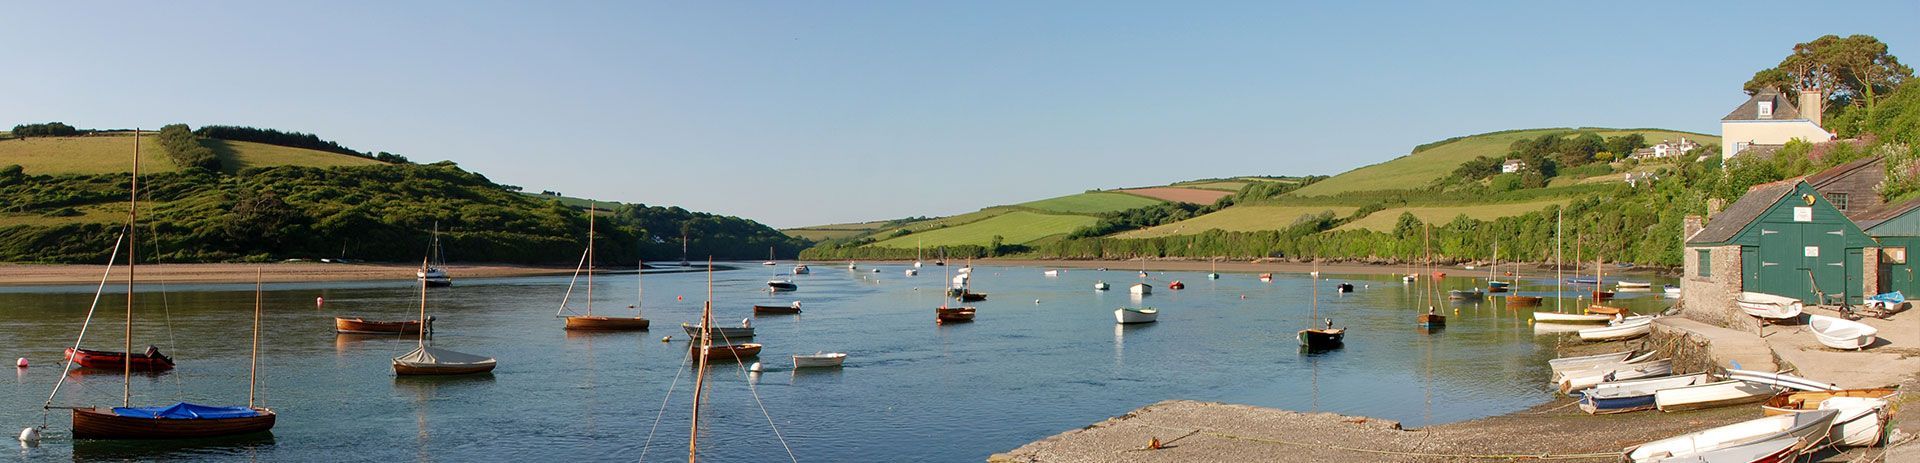 a large body of water with many boats in it